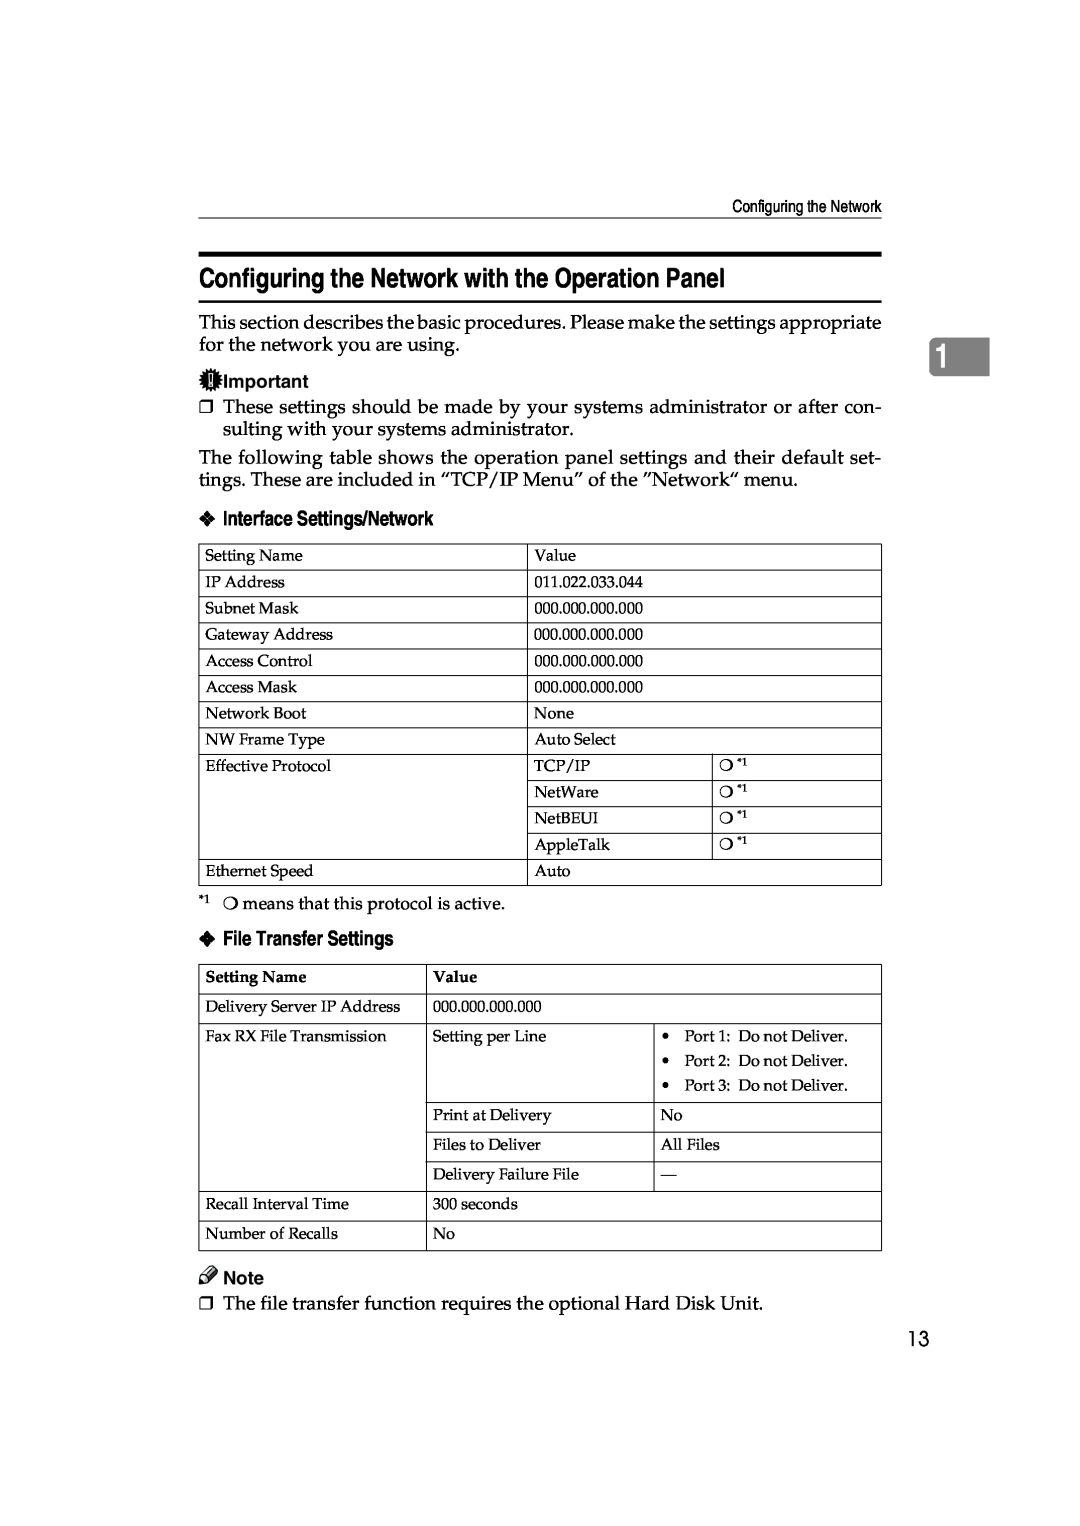 Lanier 5622 AG manual Configuring the Network with the Operation Panel, Interface Settings/Network, File Transfer Settings 